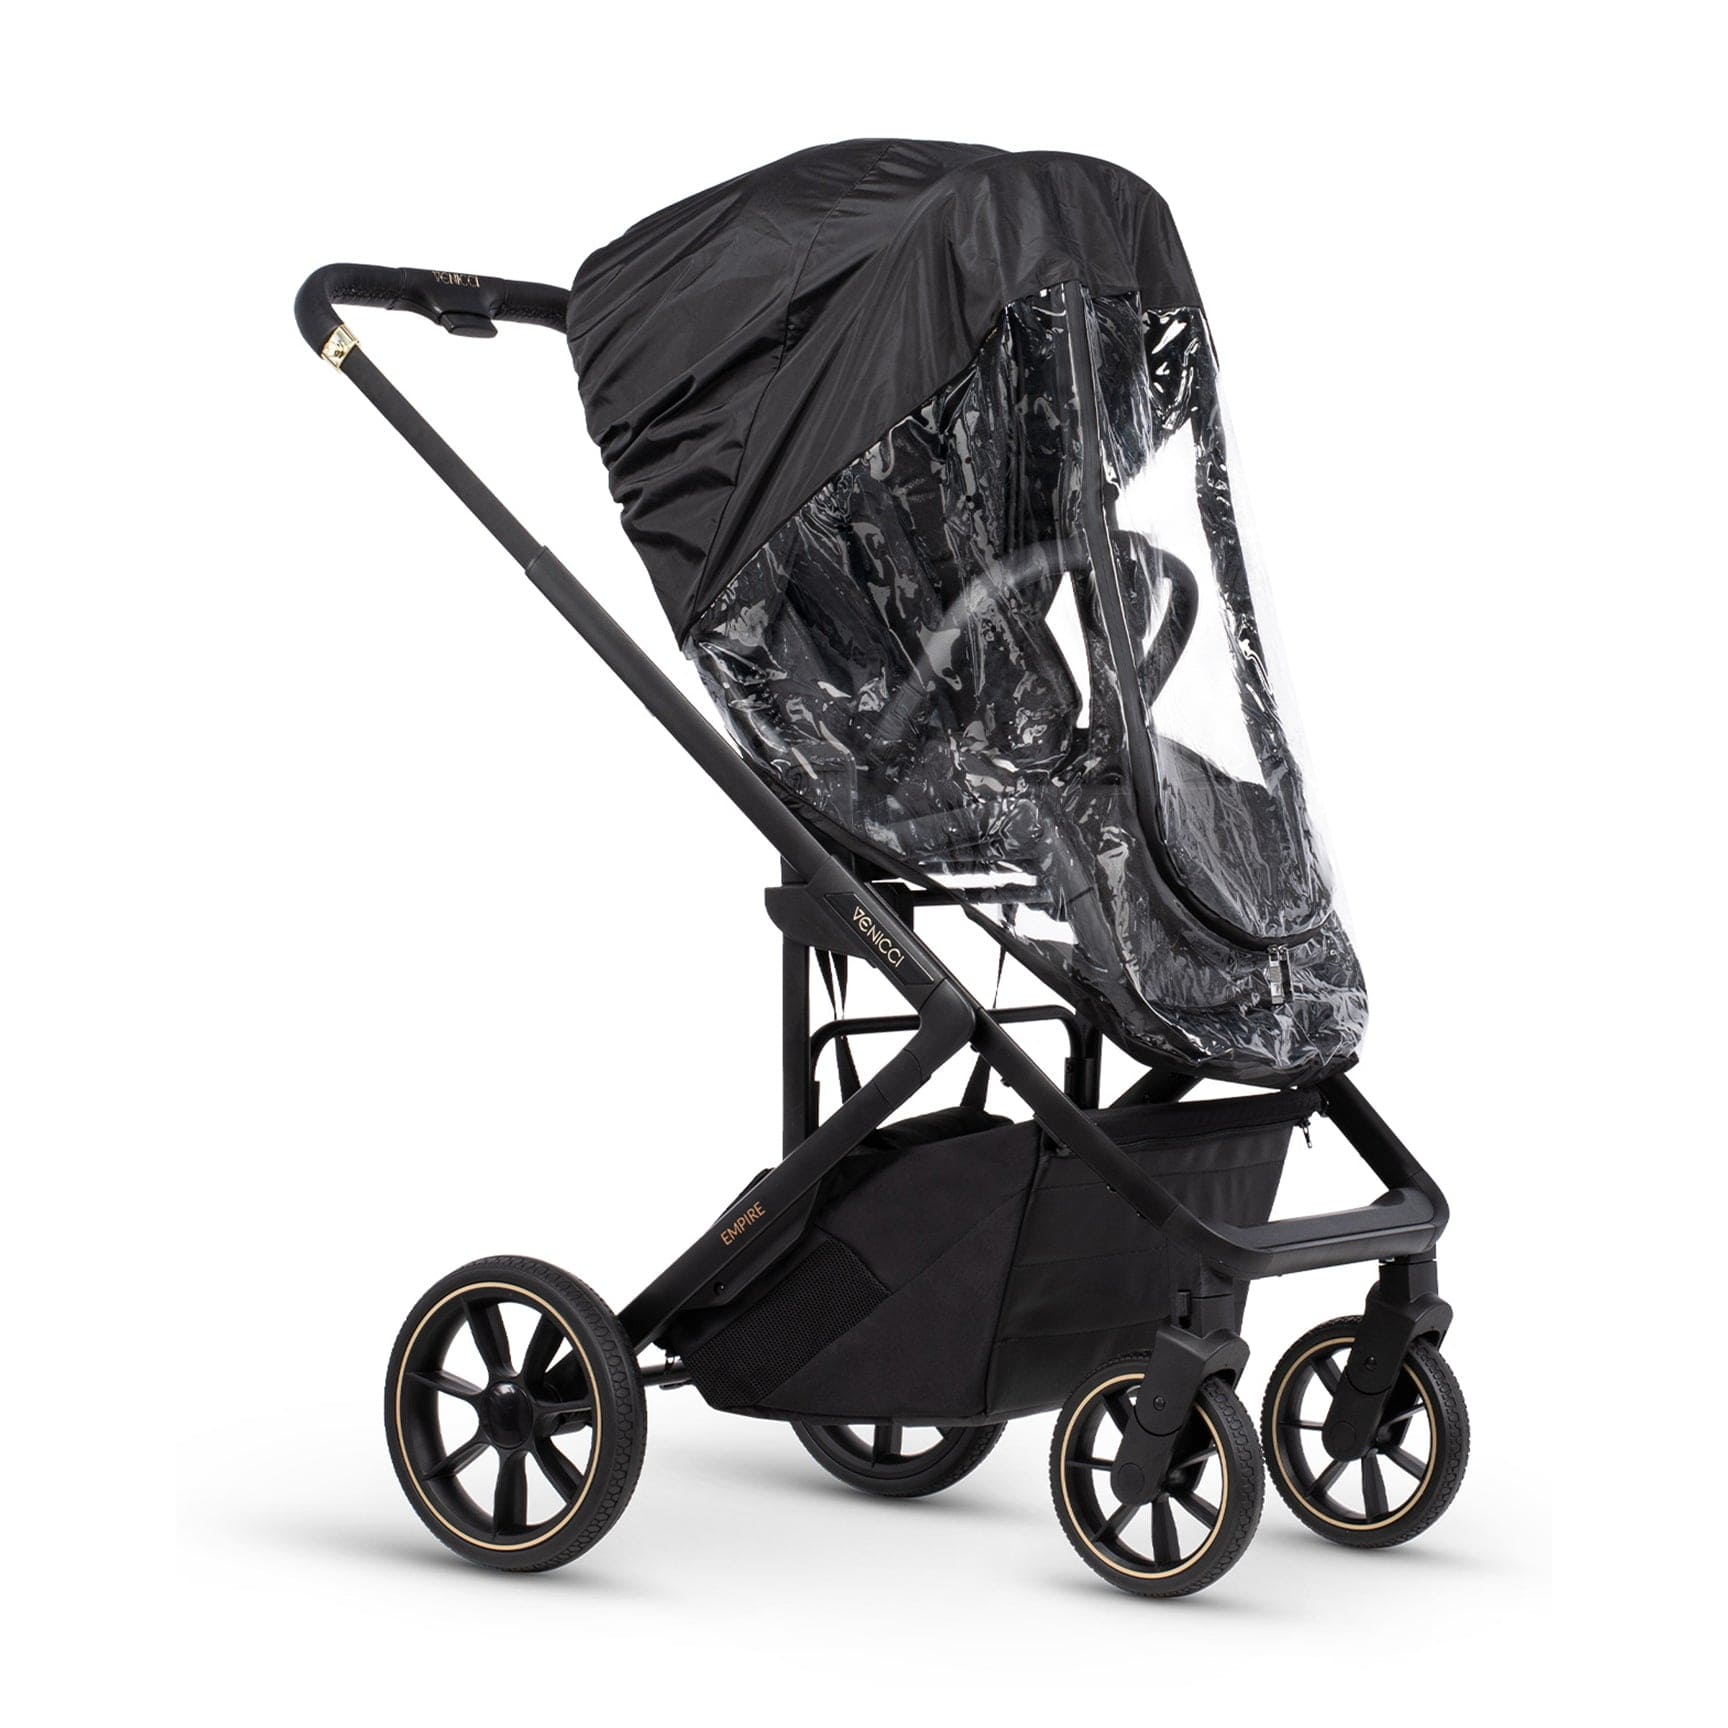 Venicci Empire Stroller & Accessory Pack in Ultra Black Pushchairs & Buggies 13175-ULT-BLK 5905261331168